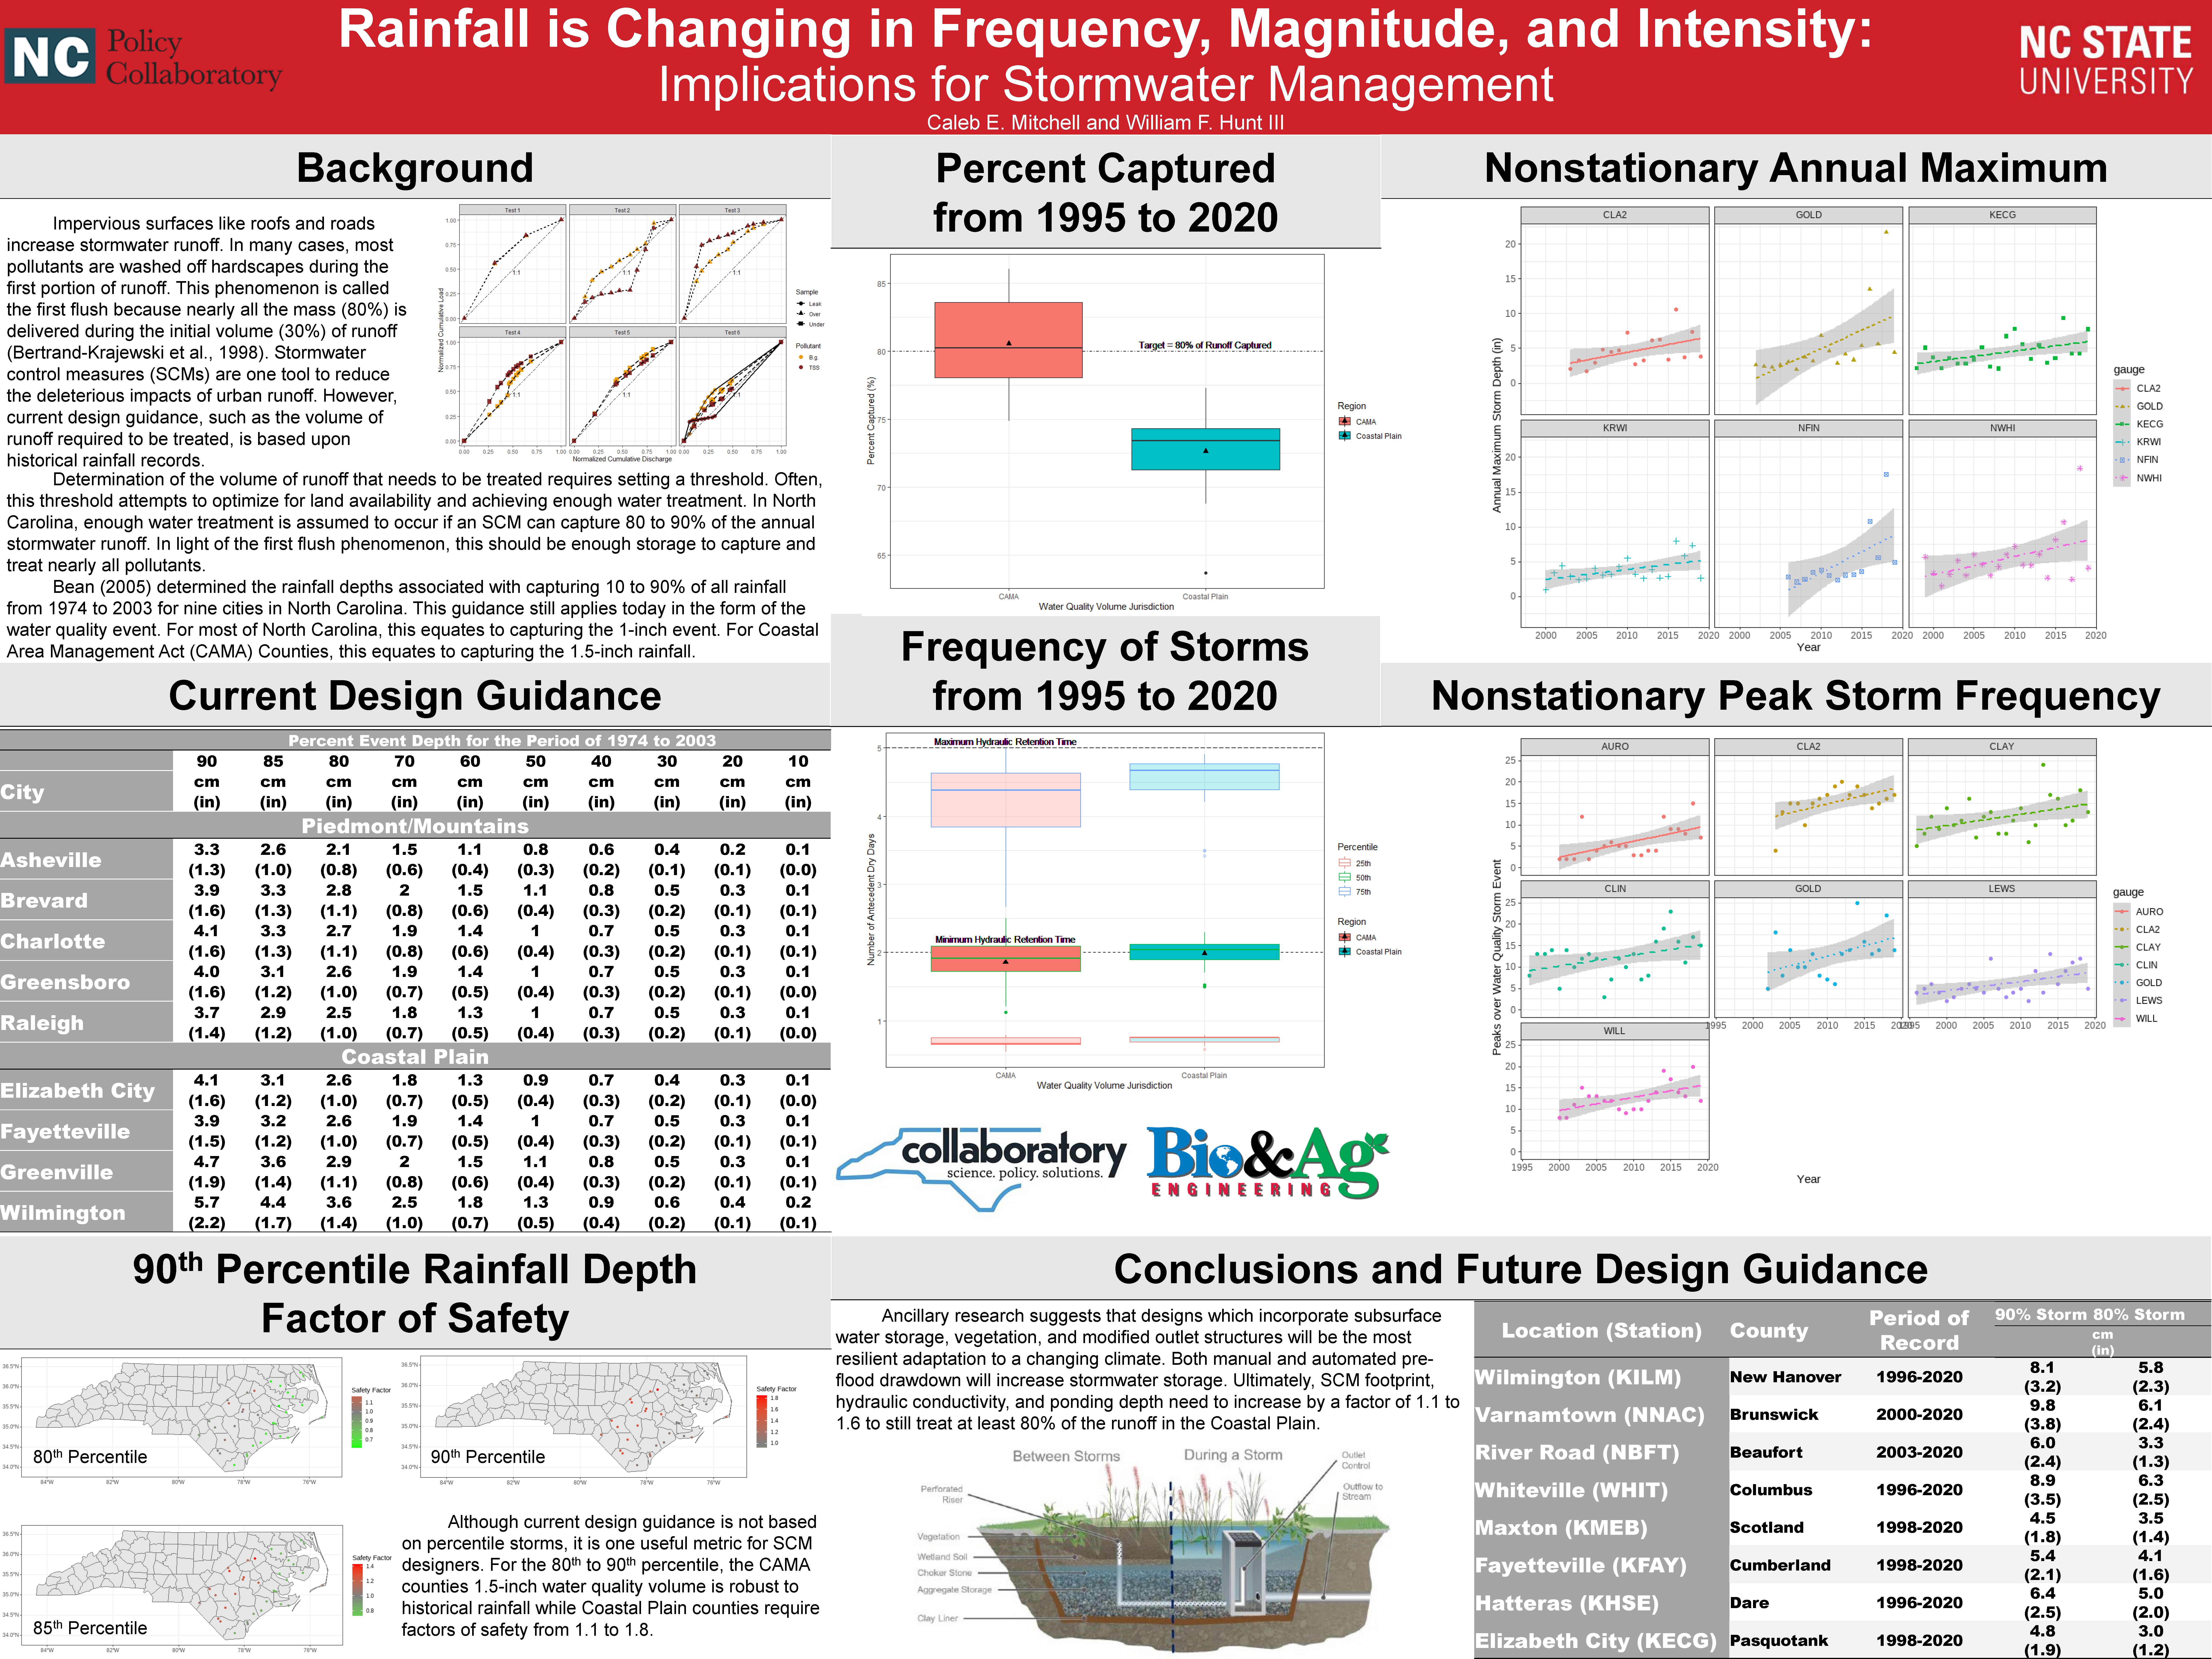 image of Caleb Mitchell's poster, "Rainfall is Changing in Frequency, Magnitude, and Intensity: Implications for Stormwater Management"